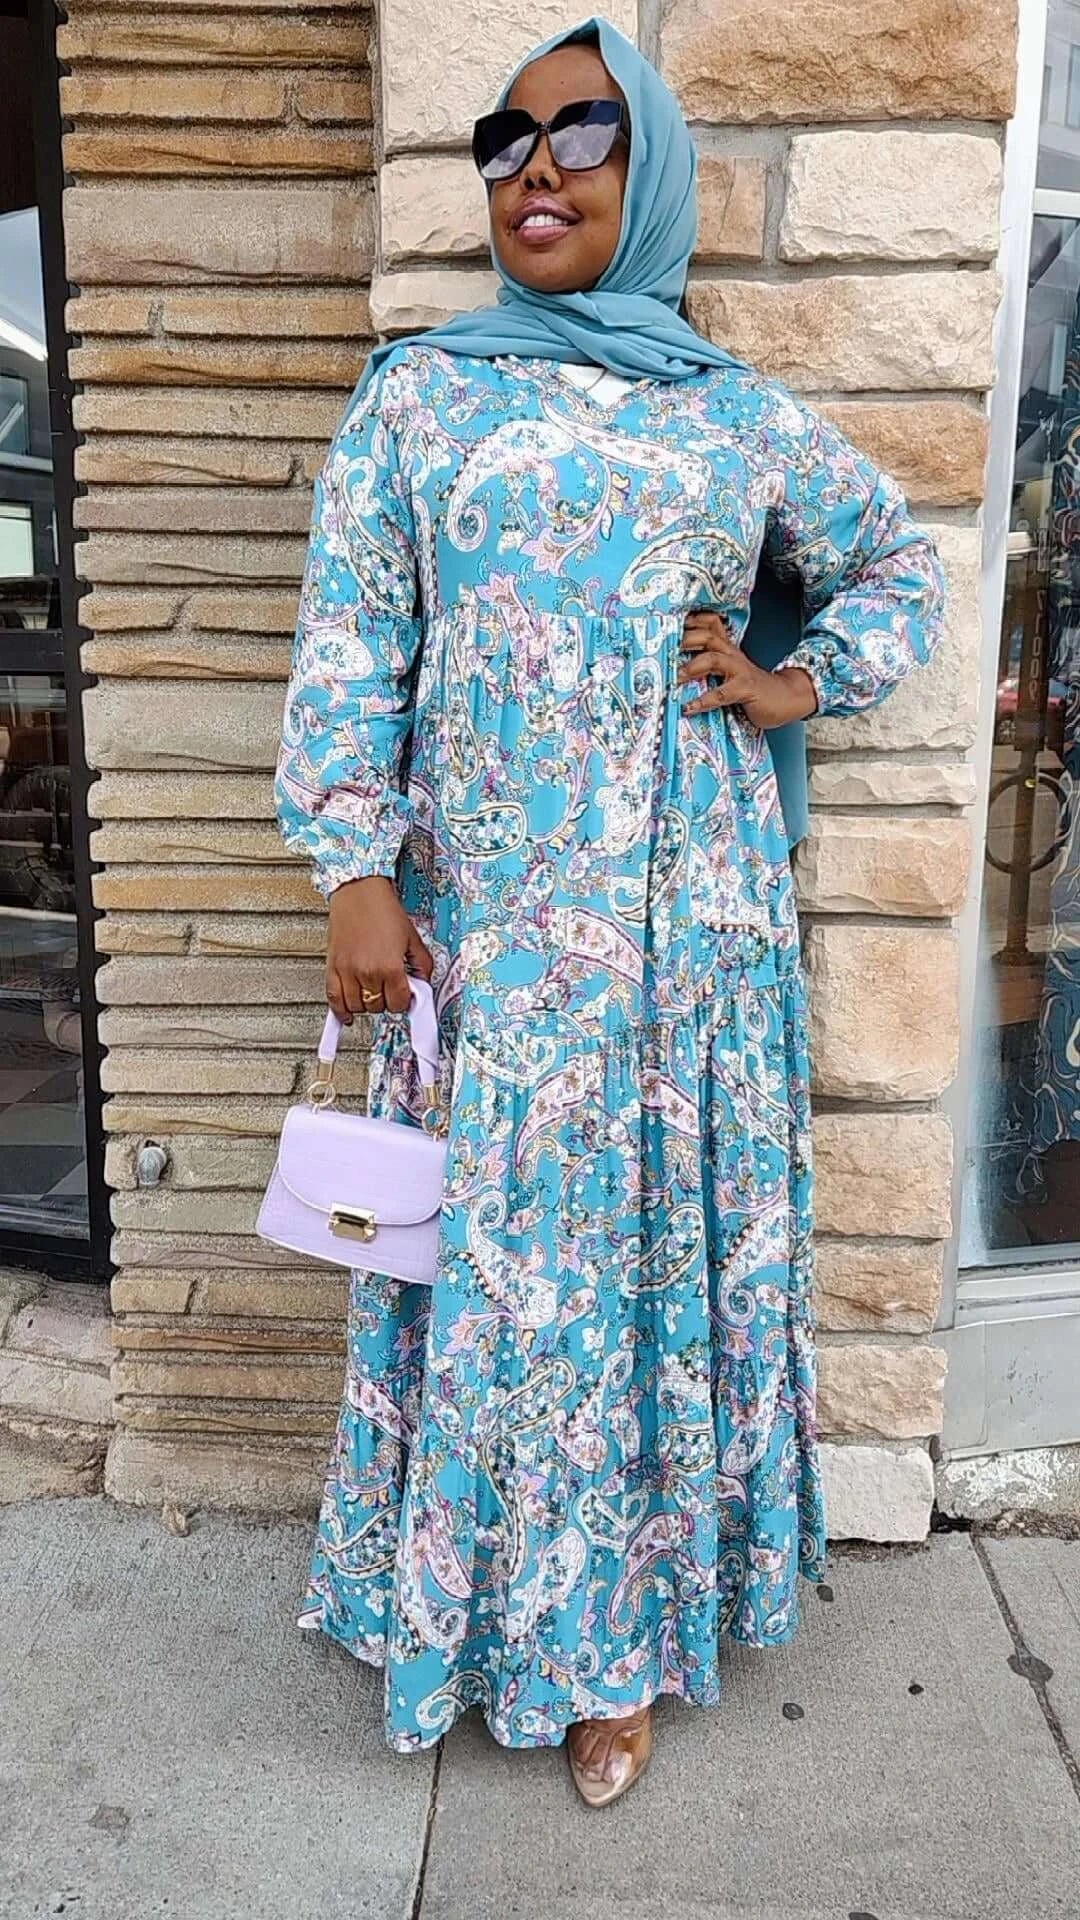 Anaam Print Maxi Dress in a Light Blue Turquoise Color with Paisley Print design available at ZIZI Boutique